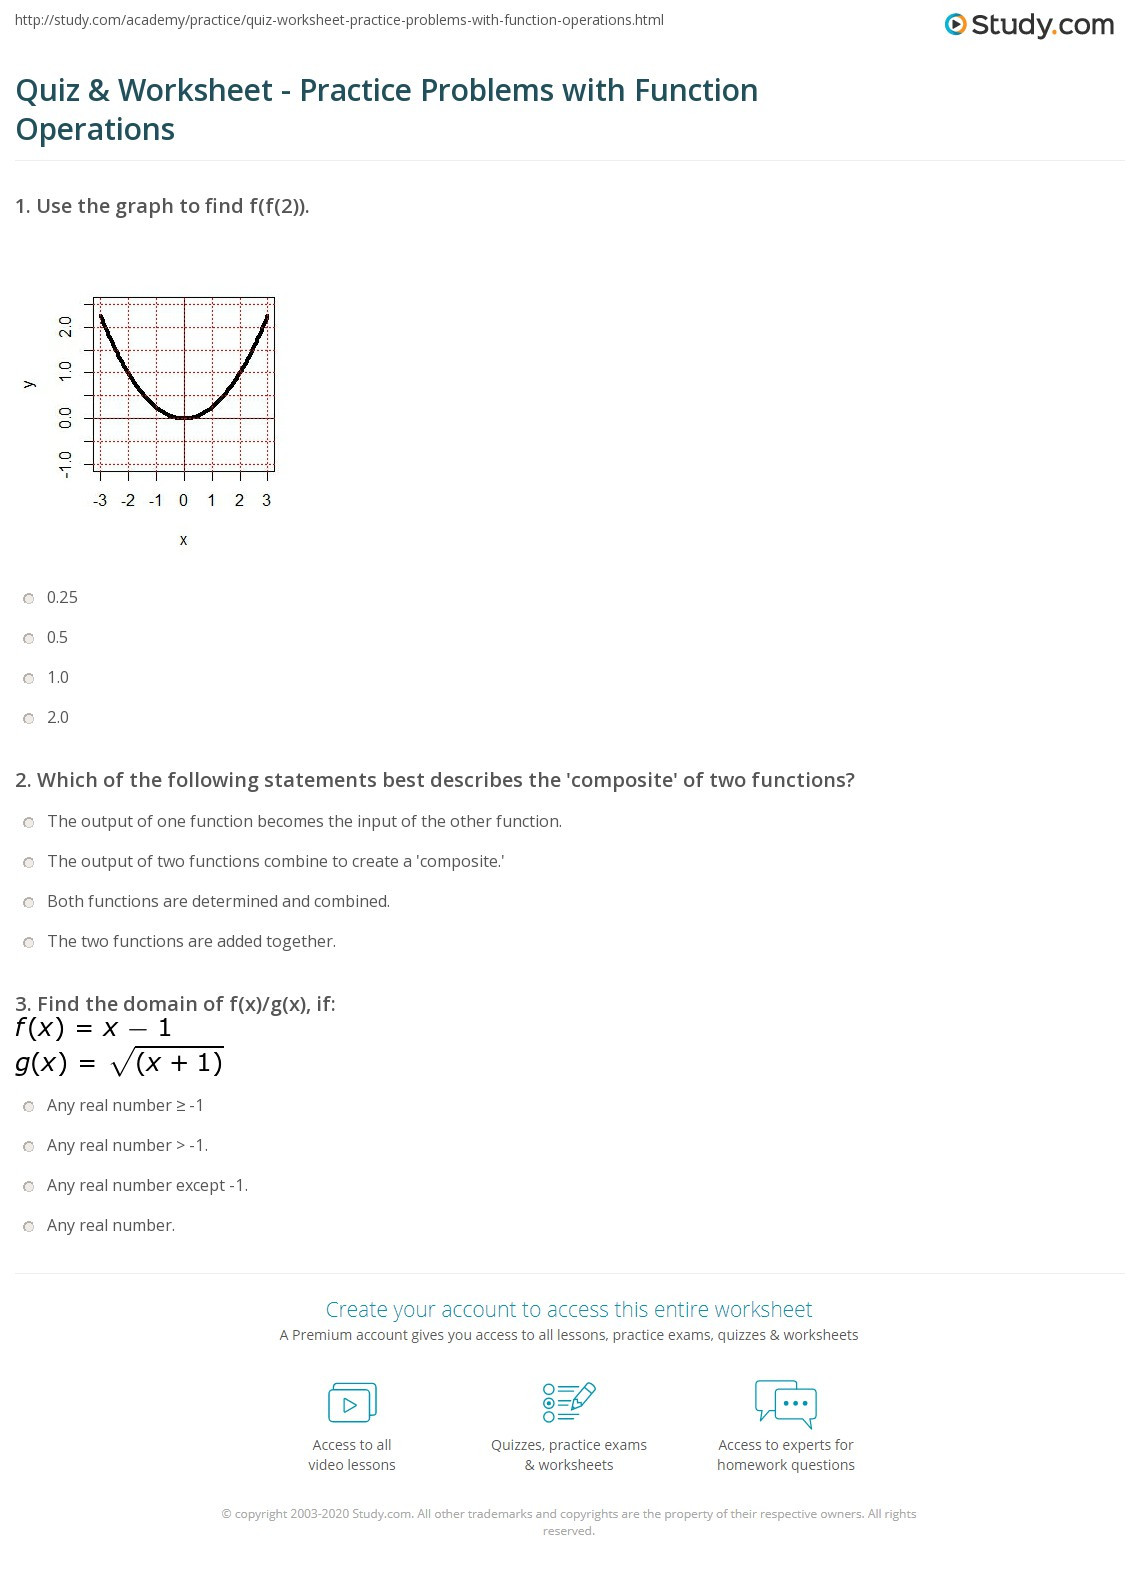 Composition Of Functions Worksheet Quiz &amp; Worksheet Practice Problems with Function